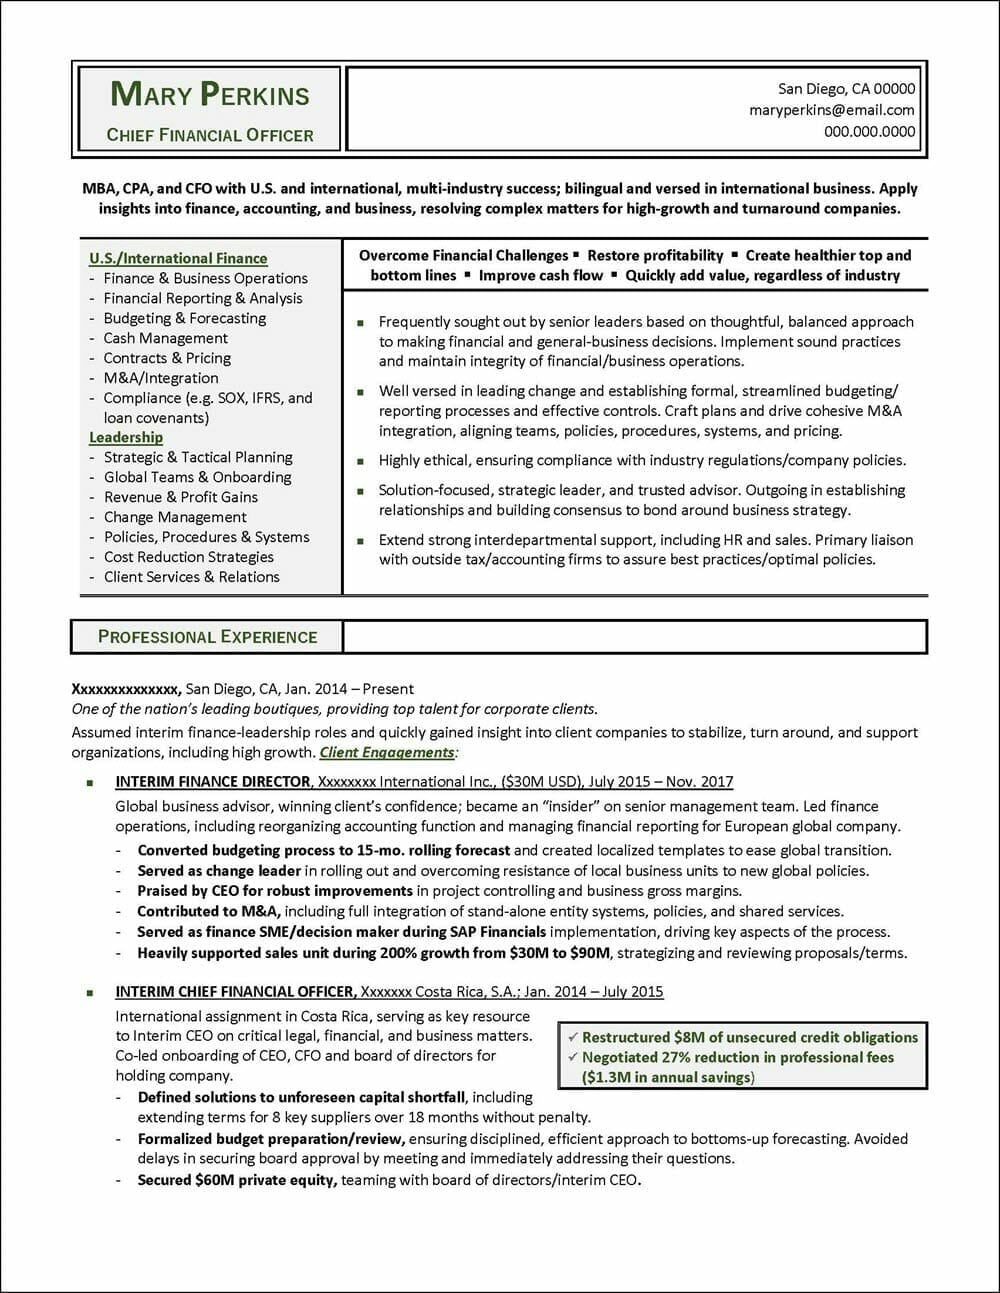 Chief Financial Officer Resume Pg1